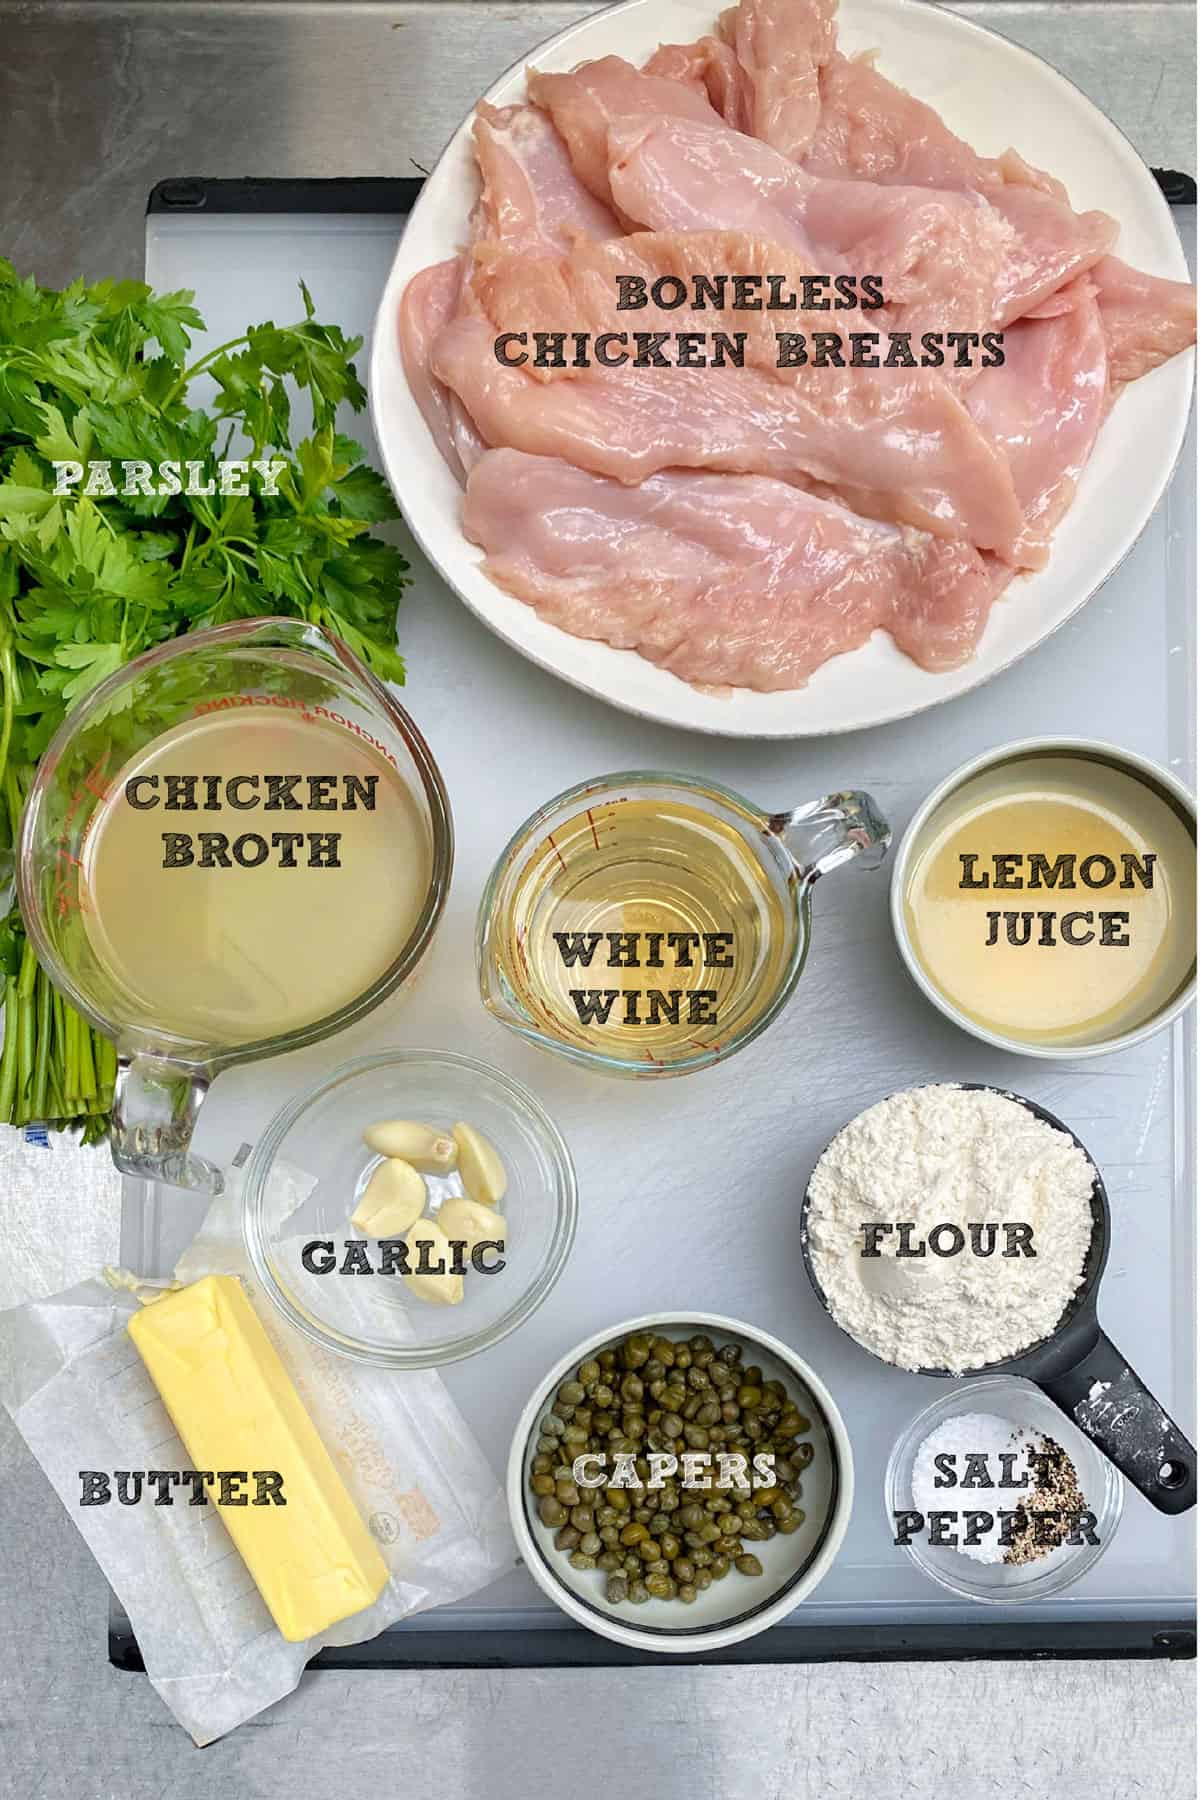 Ingredients for chicken piccata seen from above in small bowls and plates: pounded chicken cutlets, a bunch of parsley, white wine, lemon juice, chicken stock, a few cloves a garlic, a bar of butter, white flour, capers, salt and pepper